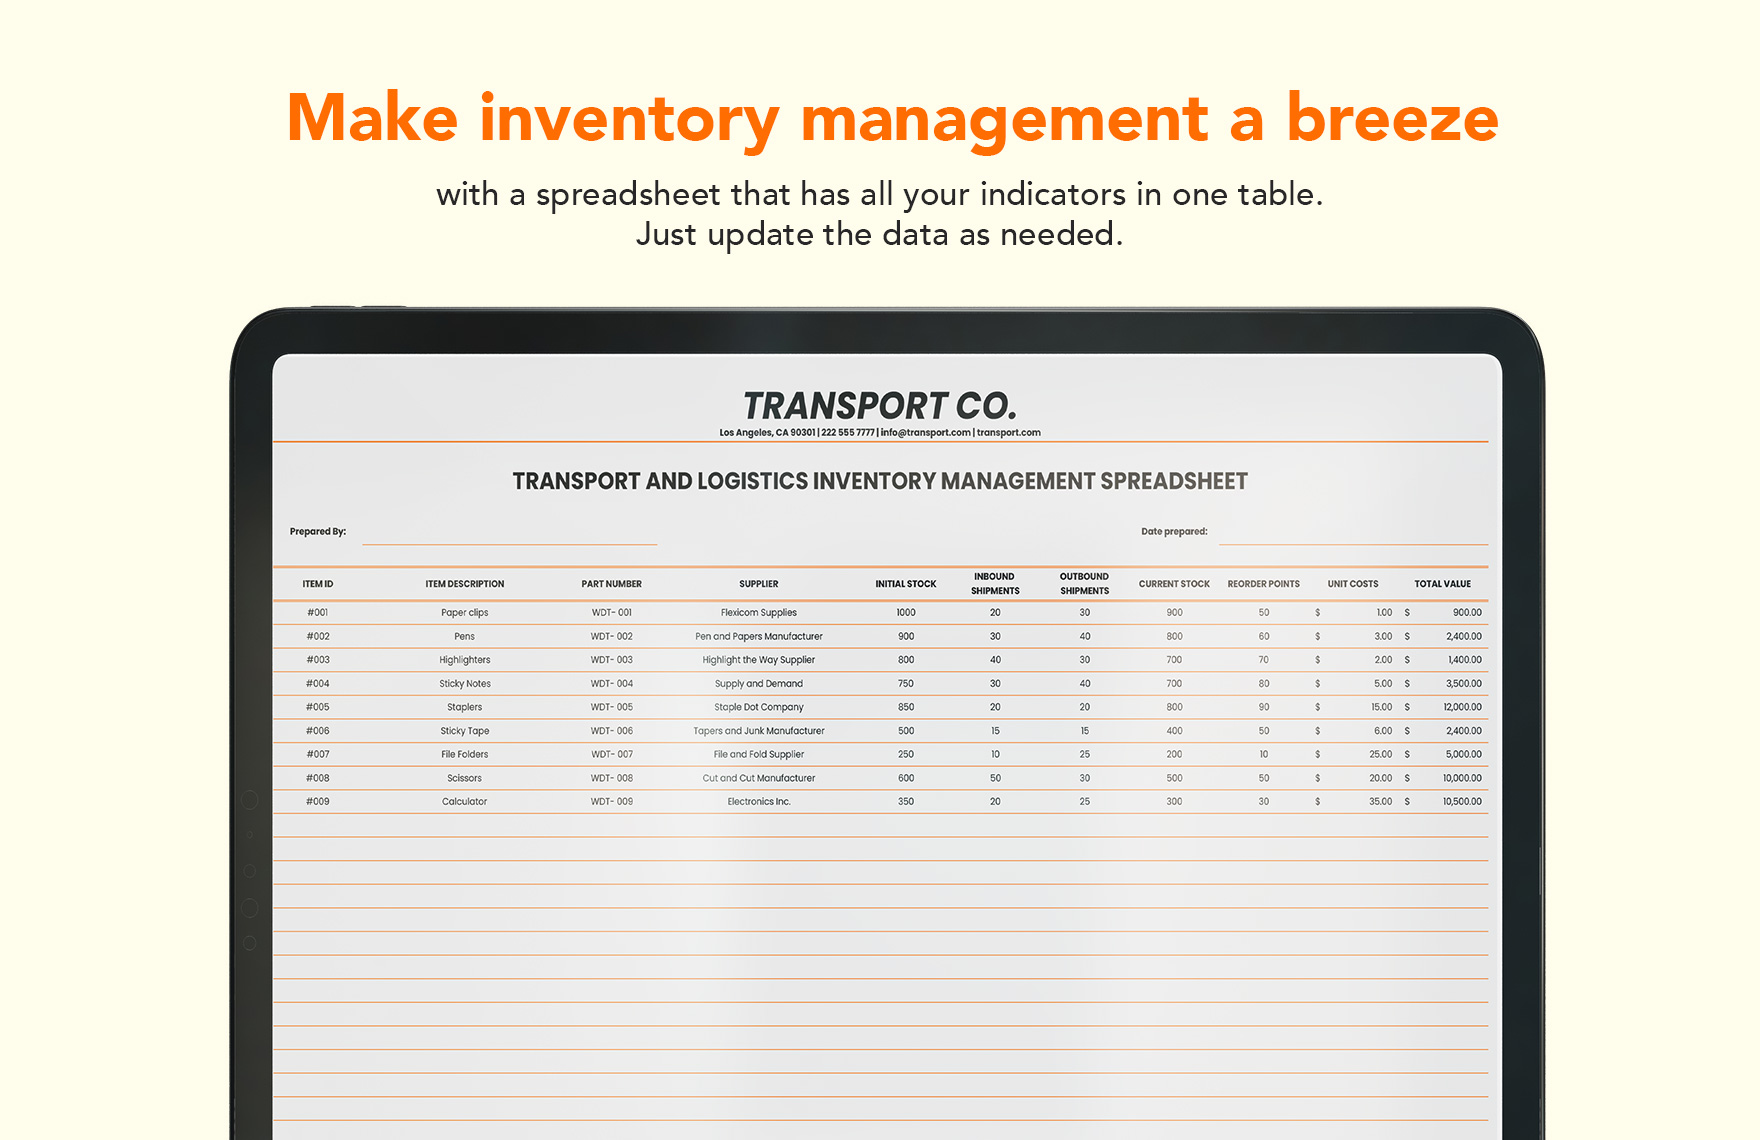 Transport and Logistics Inventory Management Spreadsheet Template